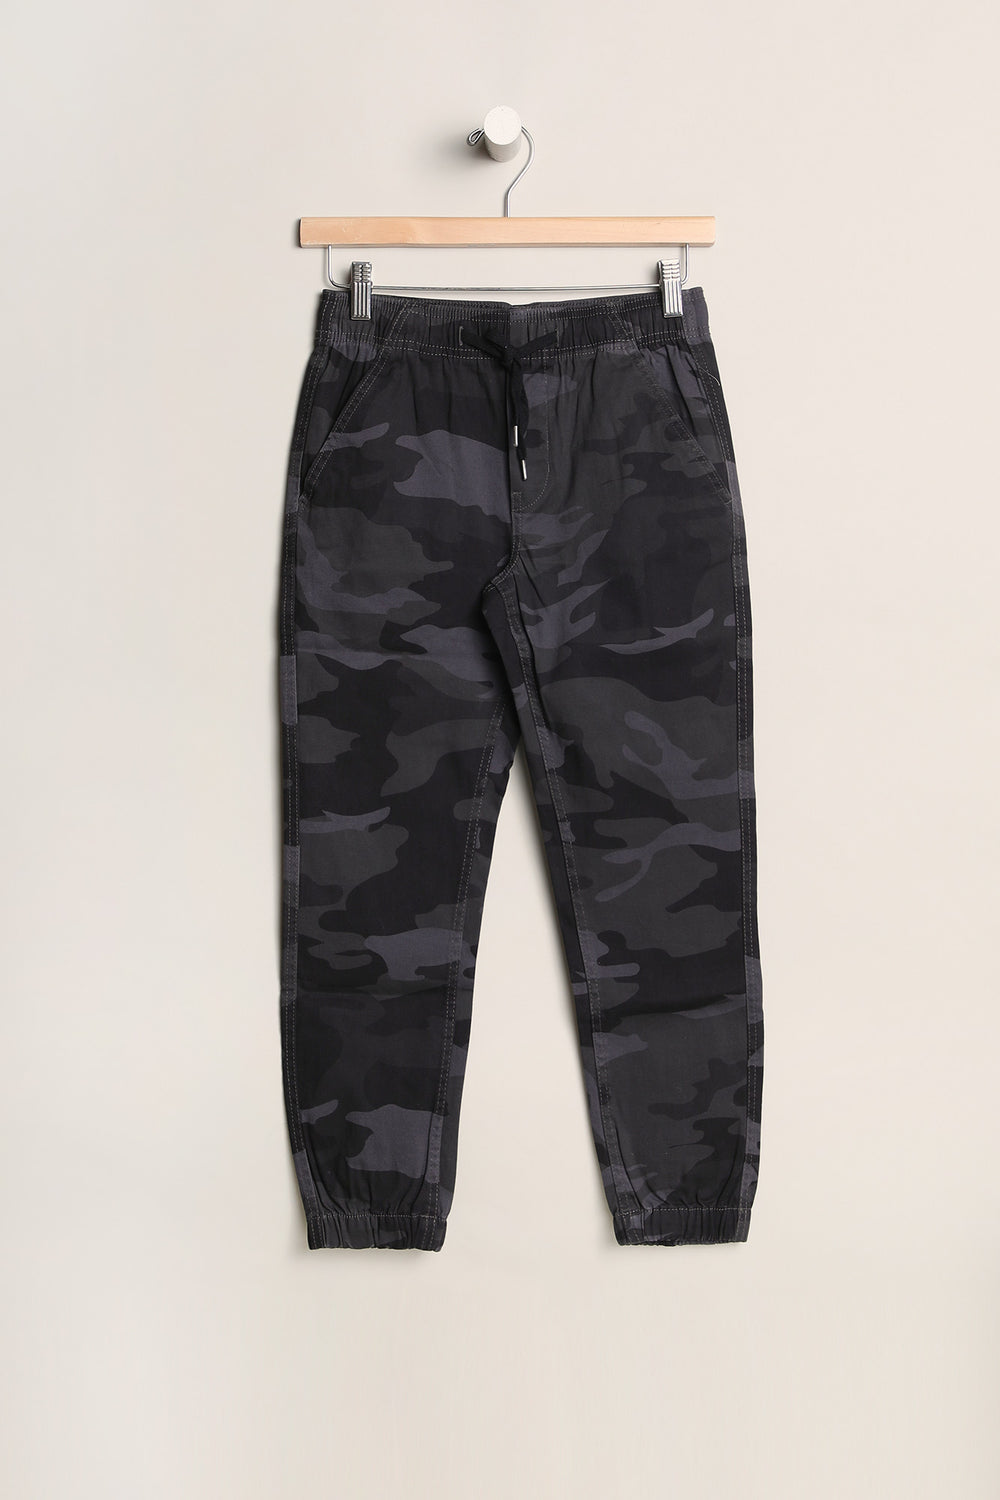 West49 Youth Slim Camo Jogger Black with White